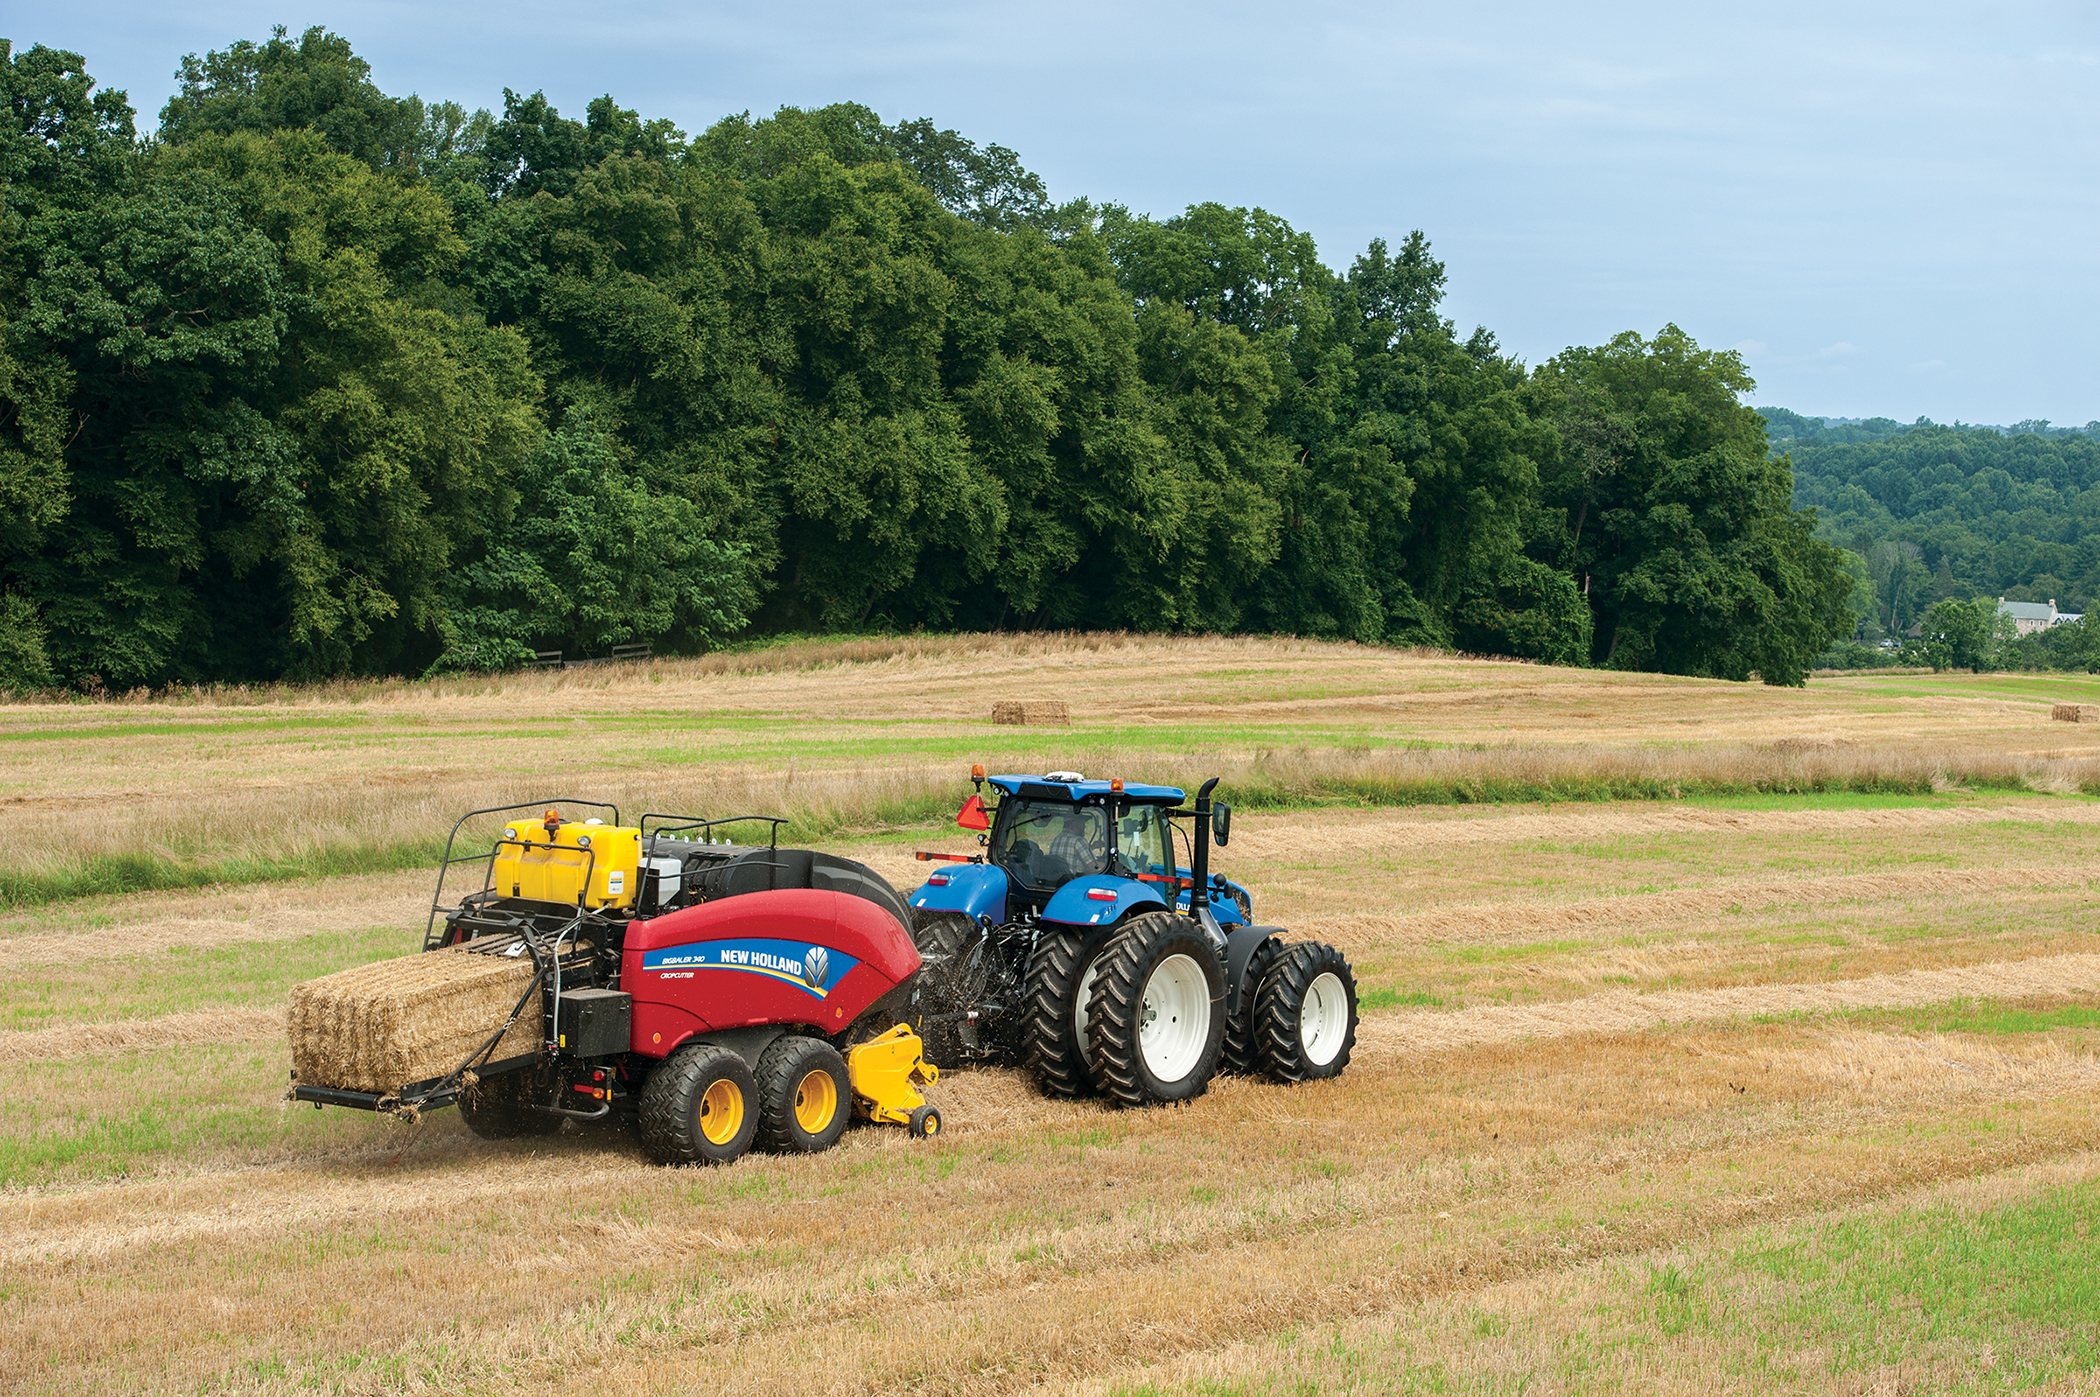 New Holland Introduces New T7.290 and T7.315 Tractors